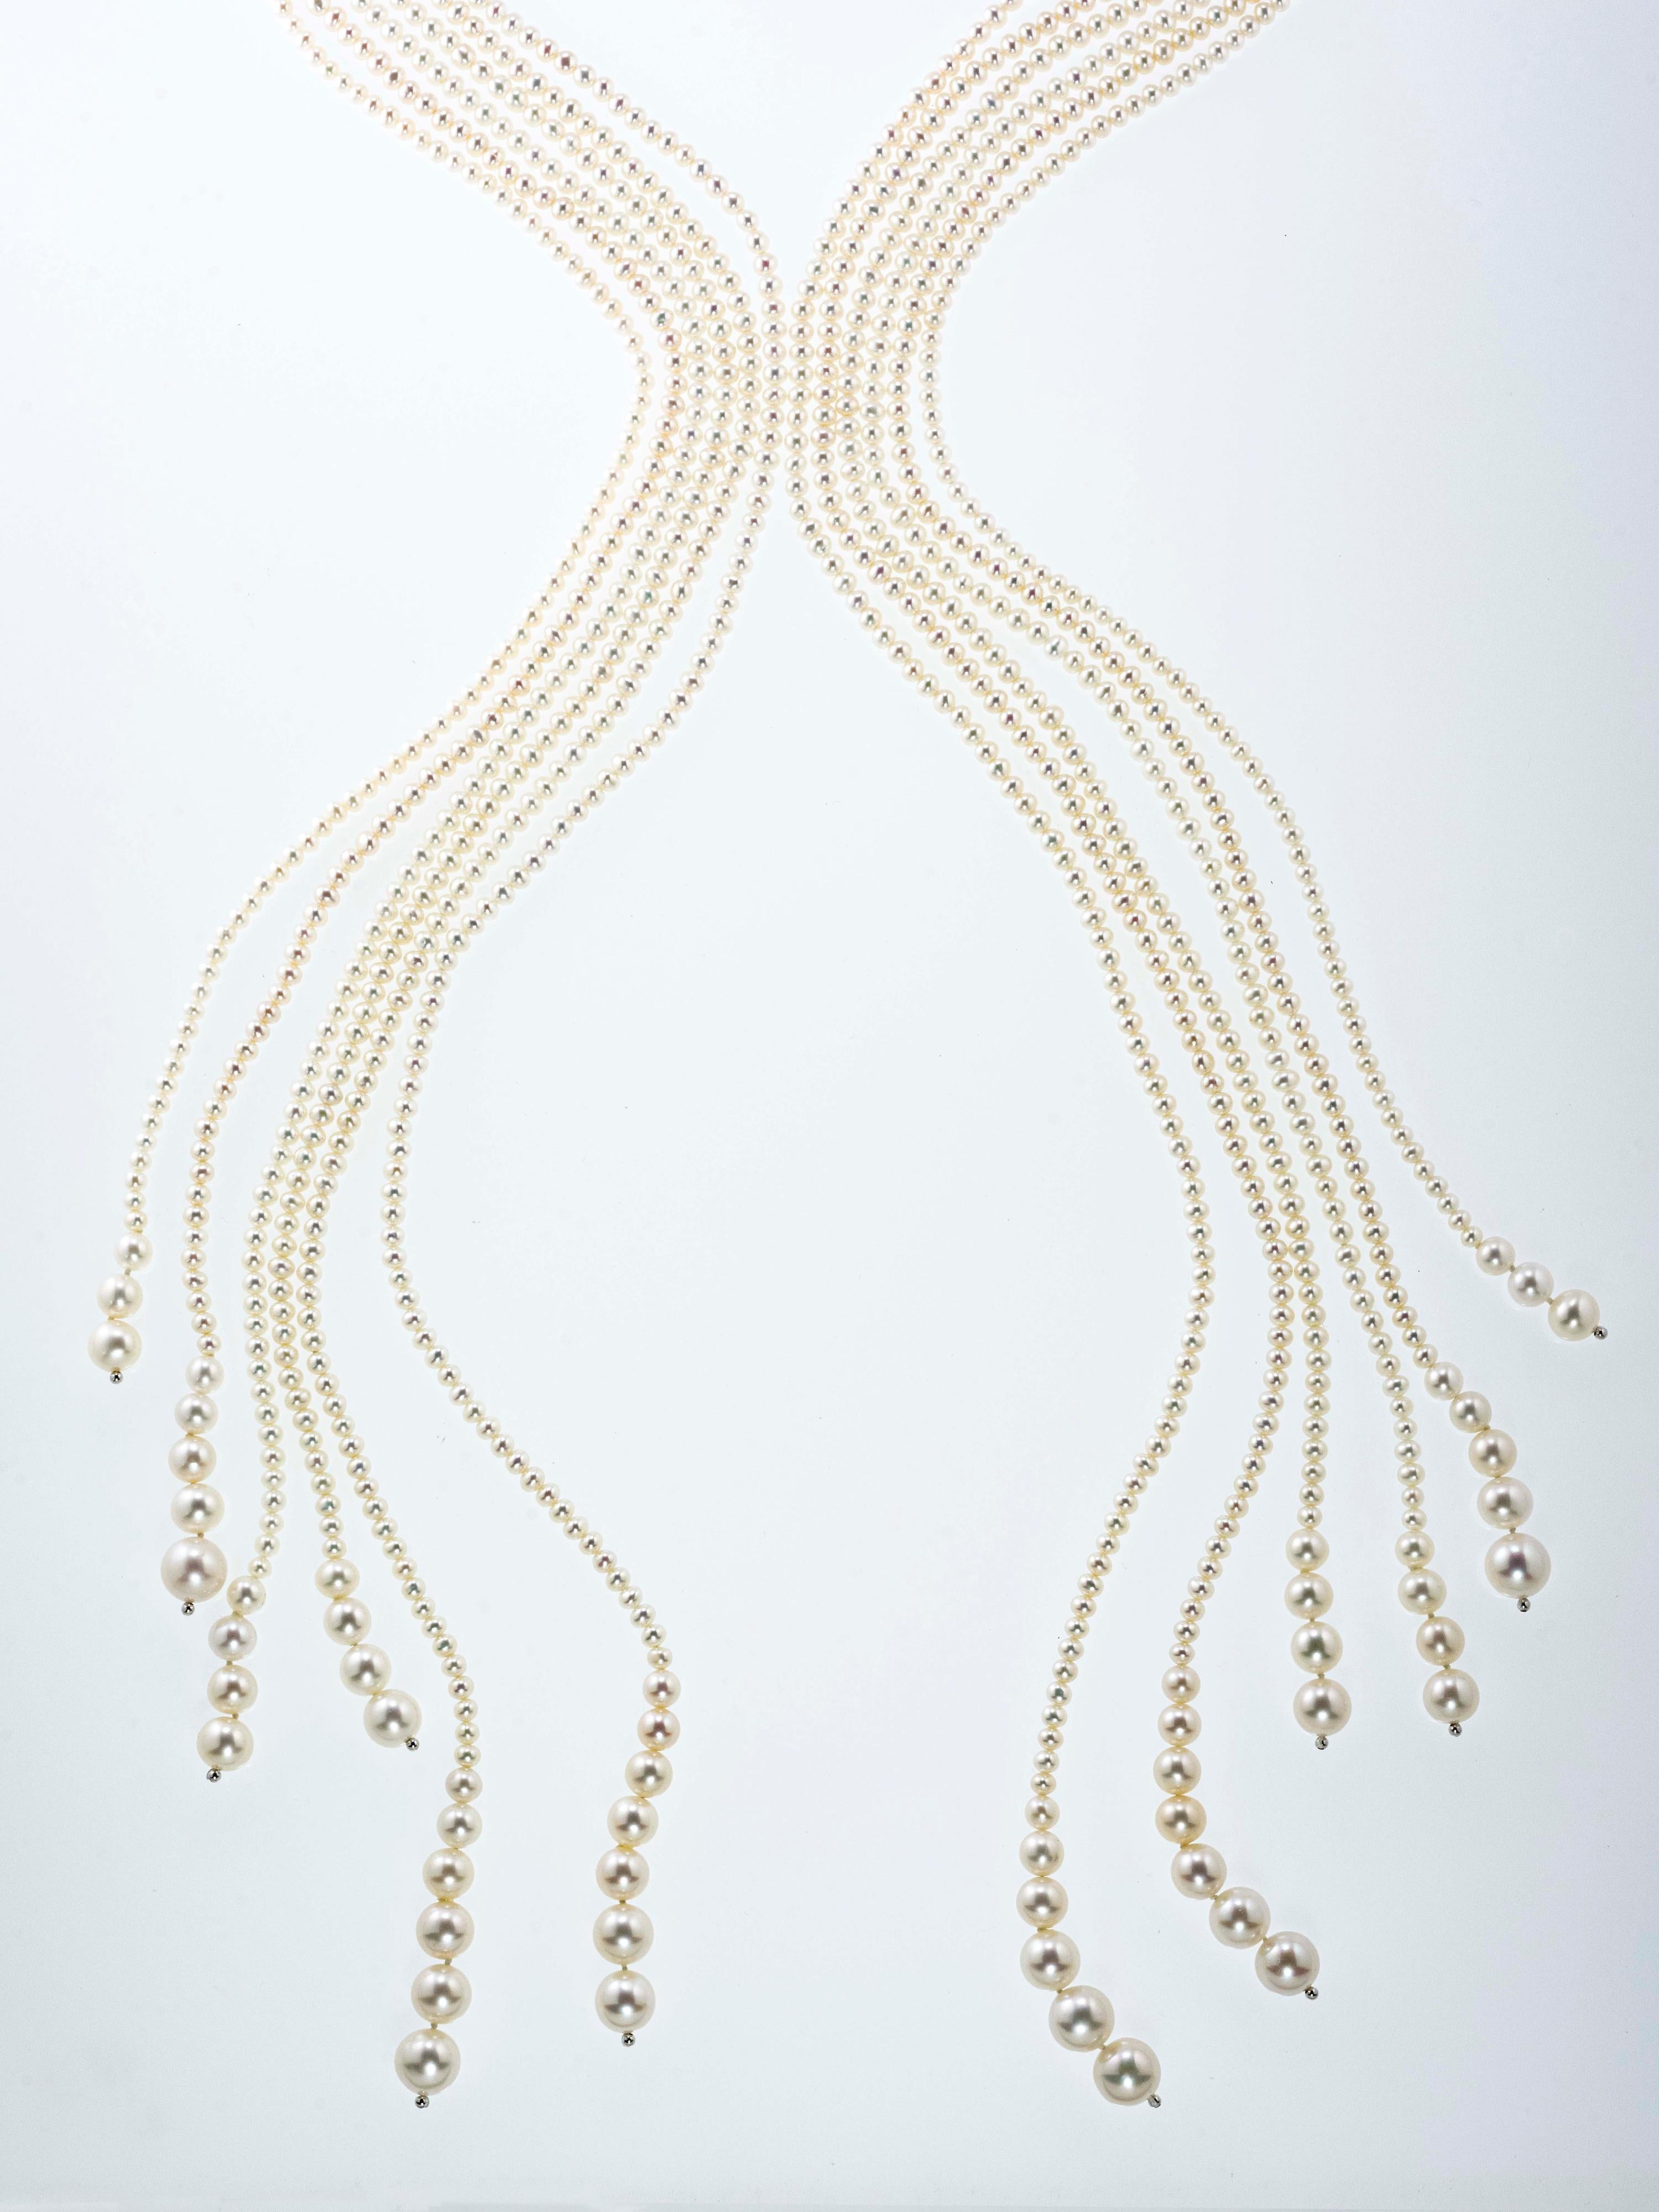 Charming and elegant sautoir entirely made of pearls and finished in 18 Kt whitw gold.
Each of the six strings is composed of pearls in several measures, from smaller ( diameter mm 3,50 ) to larger ( diameter mm 11,50 )and in different lengths, from